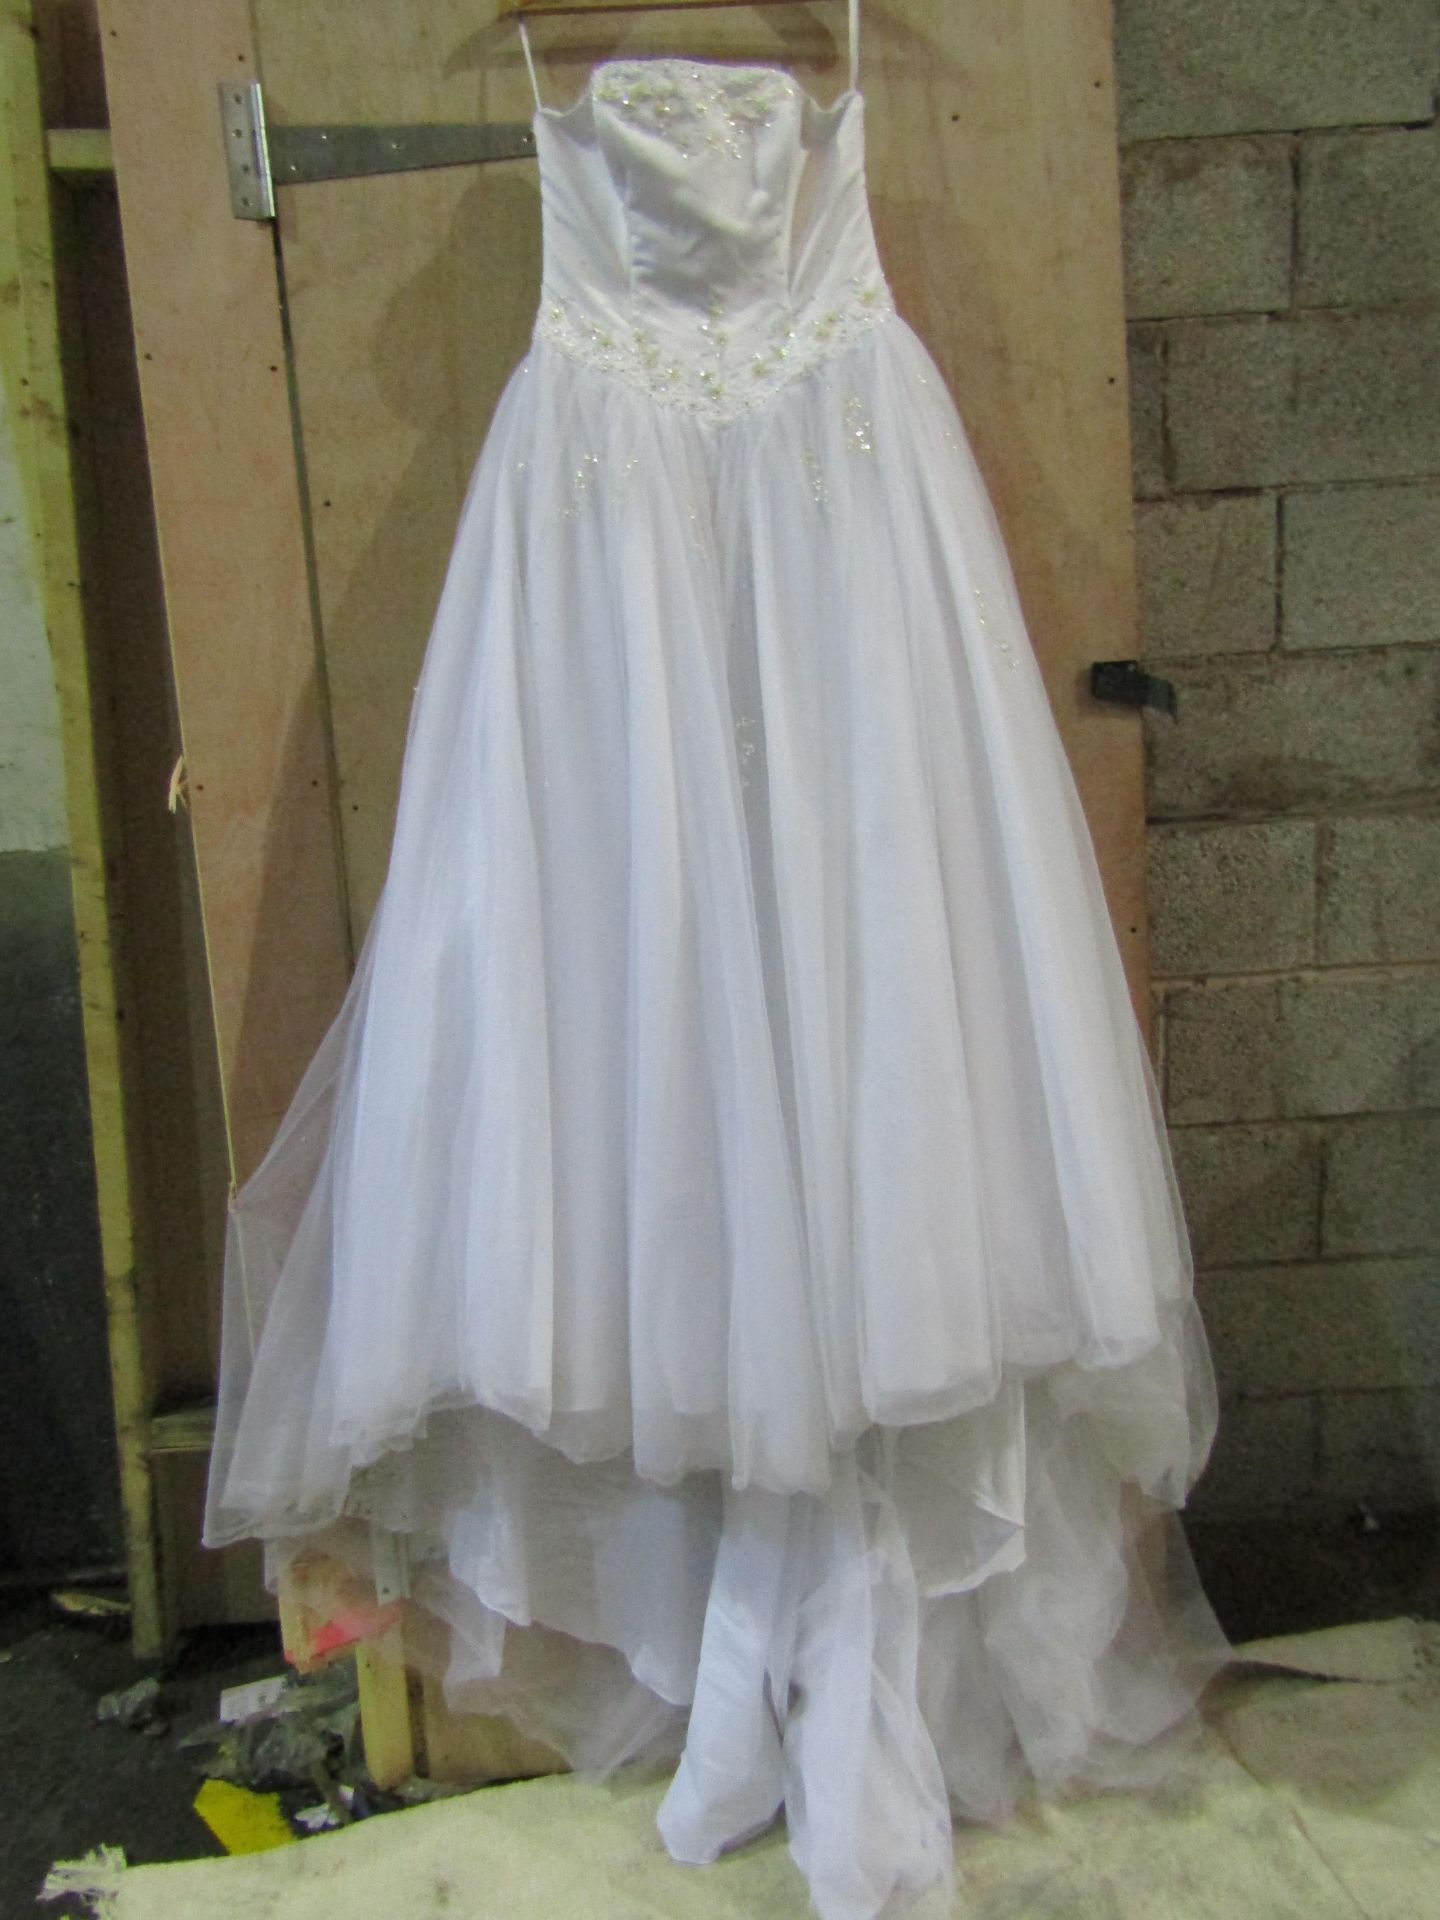 Approx 500 pieces of wedding shop stock to include wedding dresses, mother of the bride, dresses, - Image 26 of 43